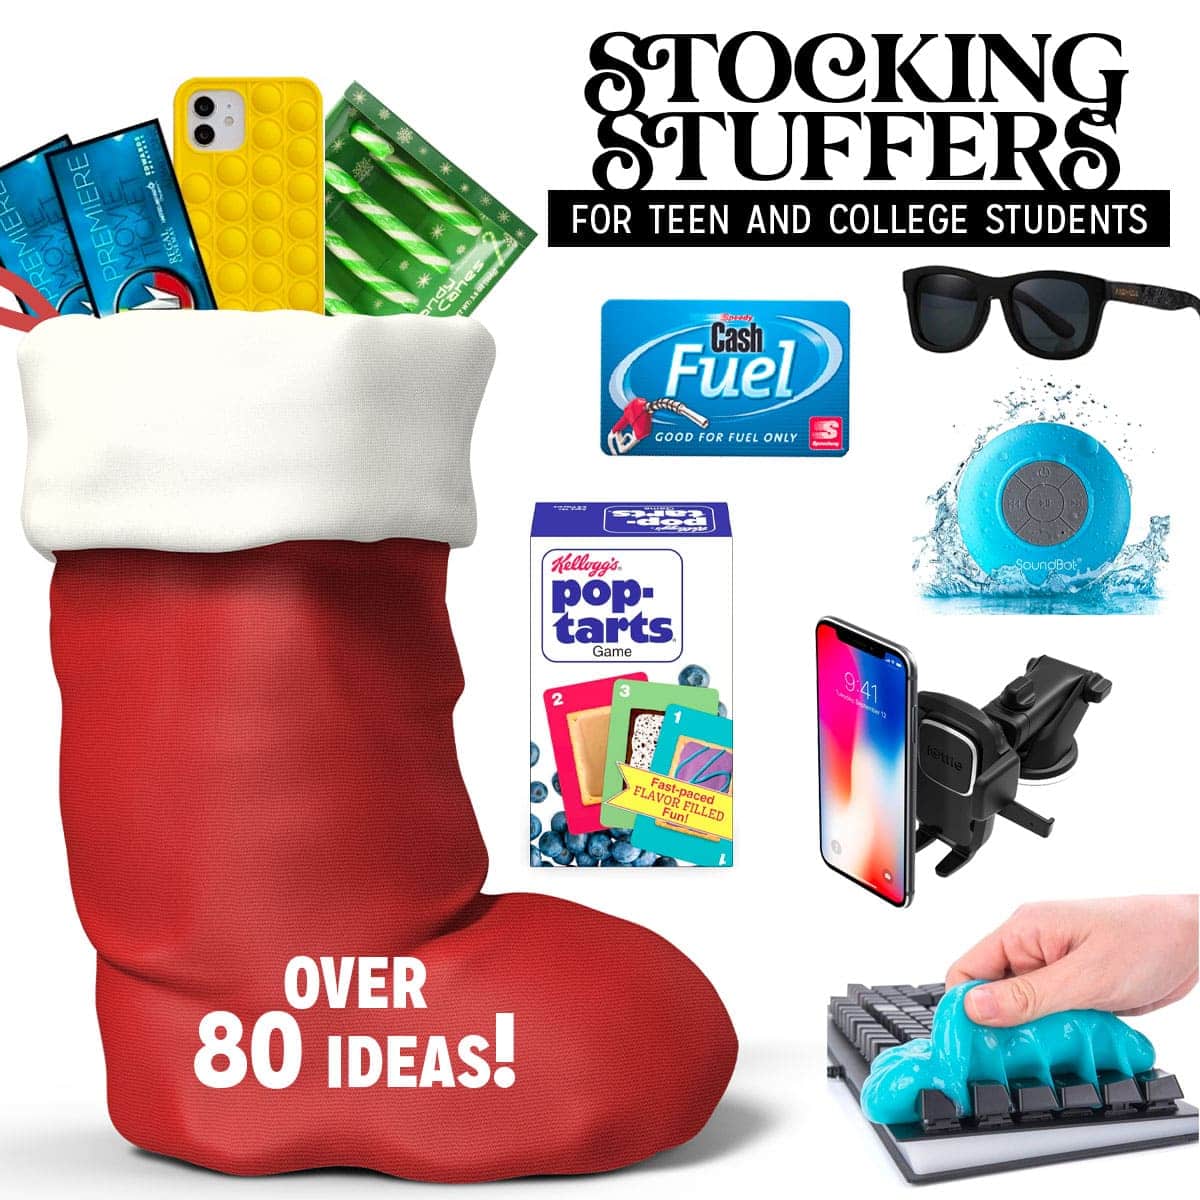 30 best stocking stuffers for men, picked by our gift experts - Reviewed